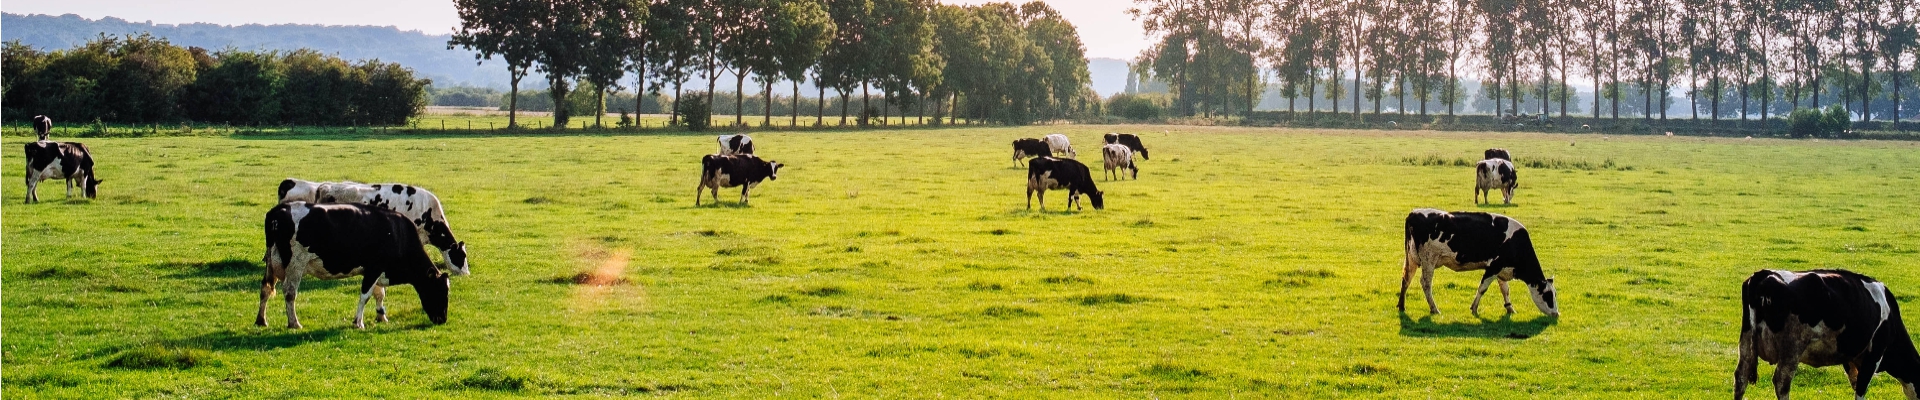 delaval hoofcare, insulators, testers and accessories, Generators, electric cattle, Water, for calves, trimming equipment, tethering and identification, cow welfare and latrines, machinery and equipment for the food industry